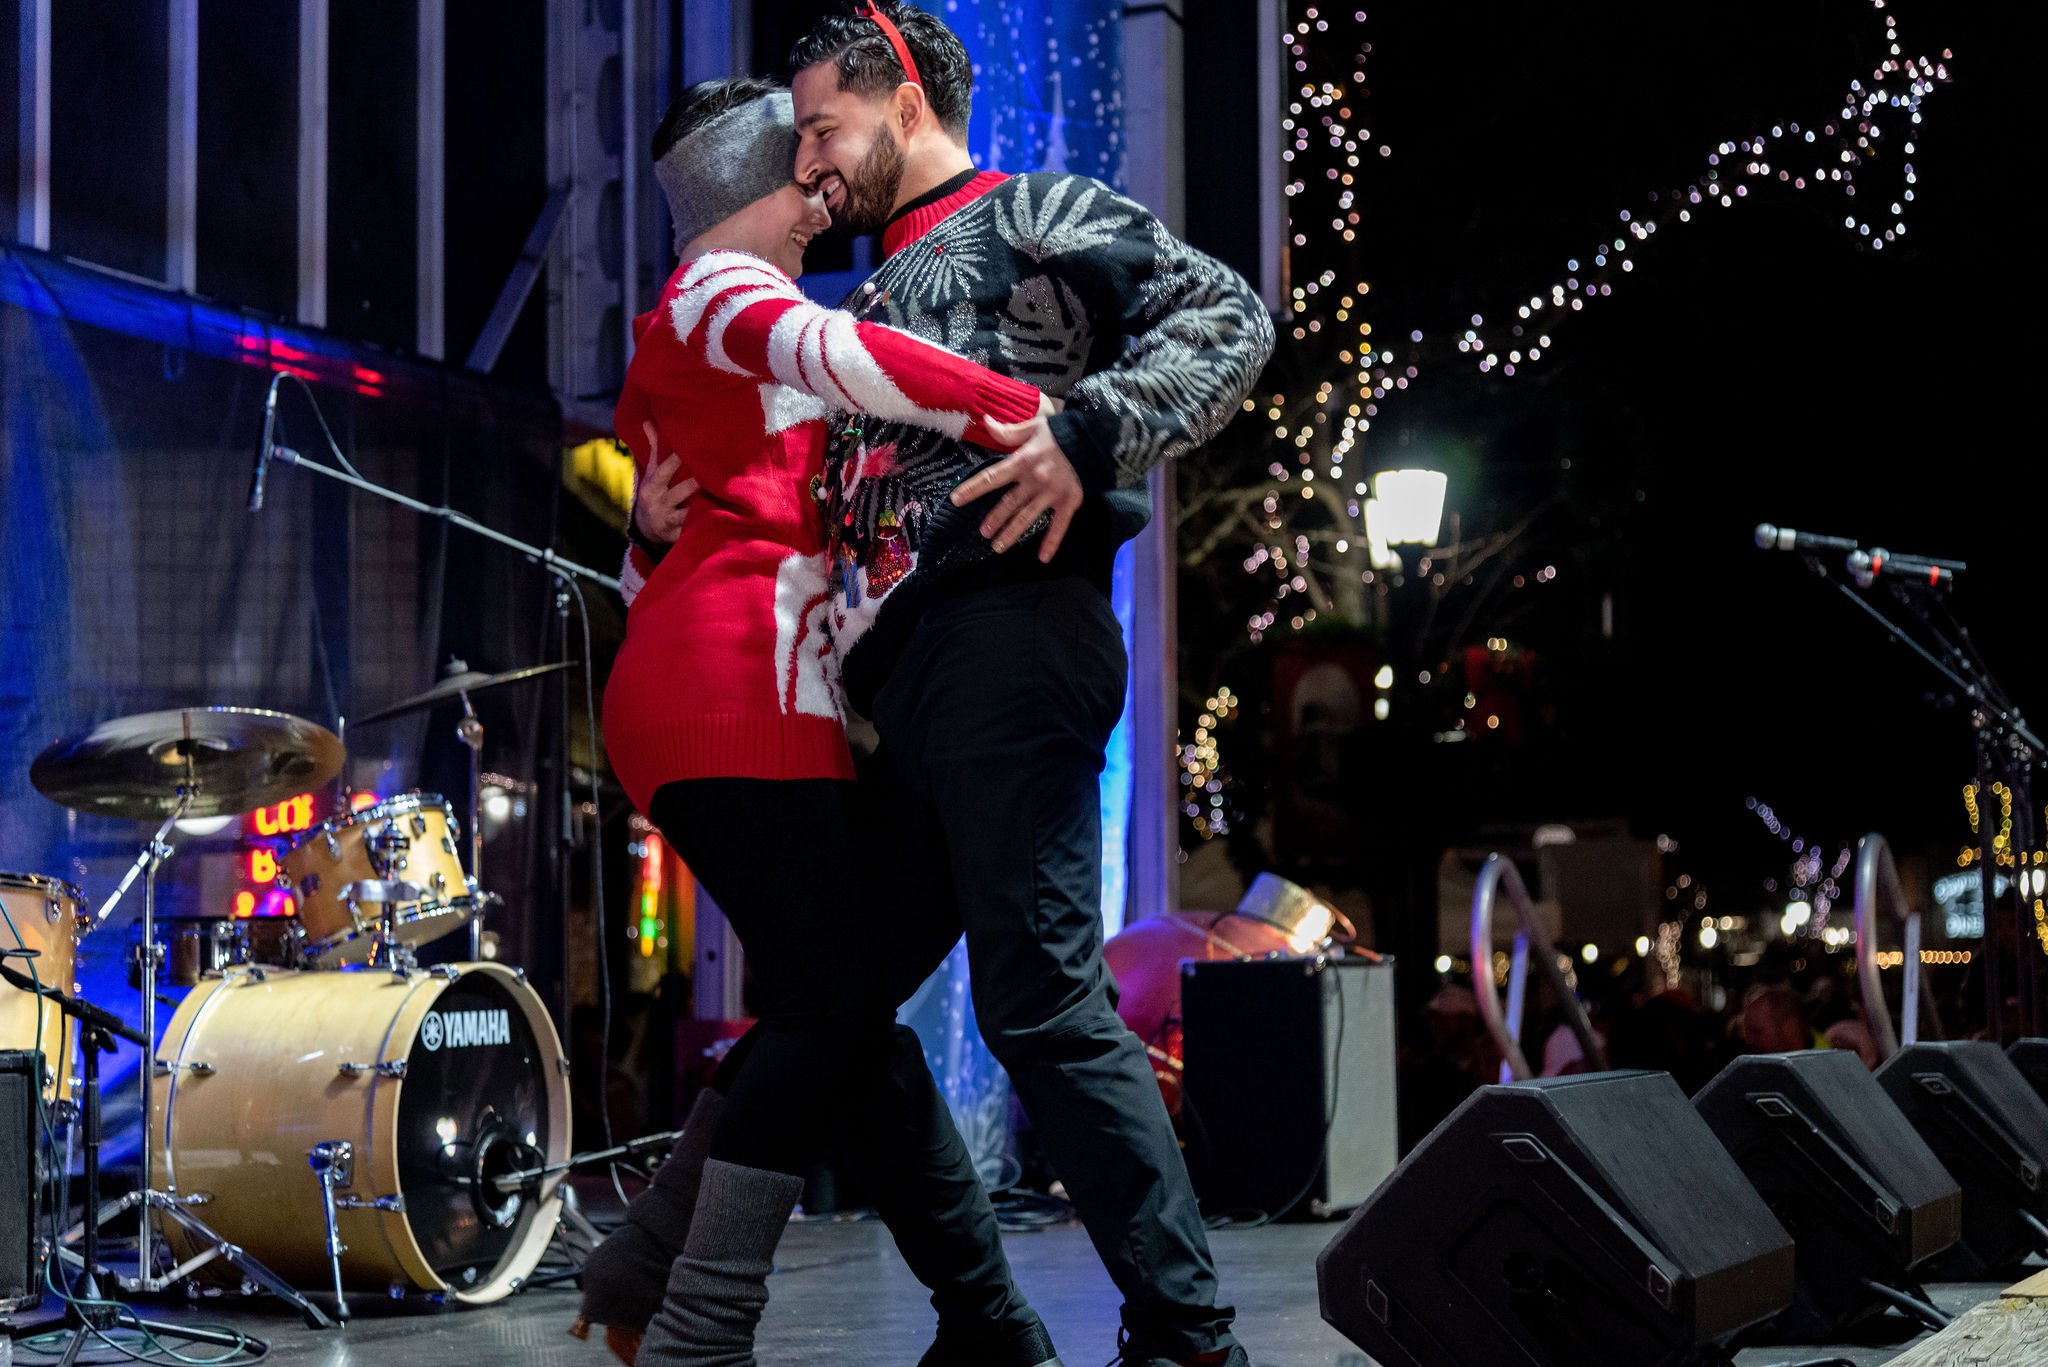 Professional Dancers dancing on stage at an outdoor downtown Holiday event (Copy)